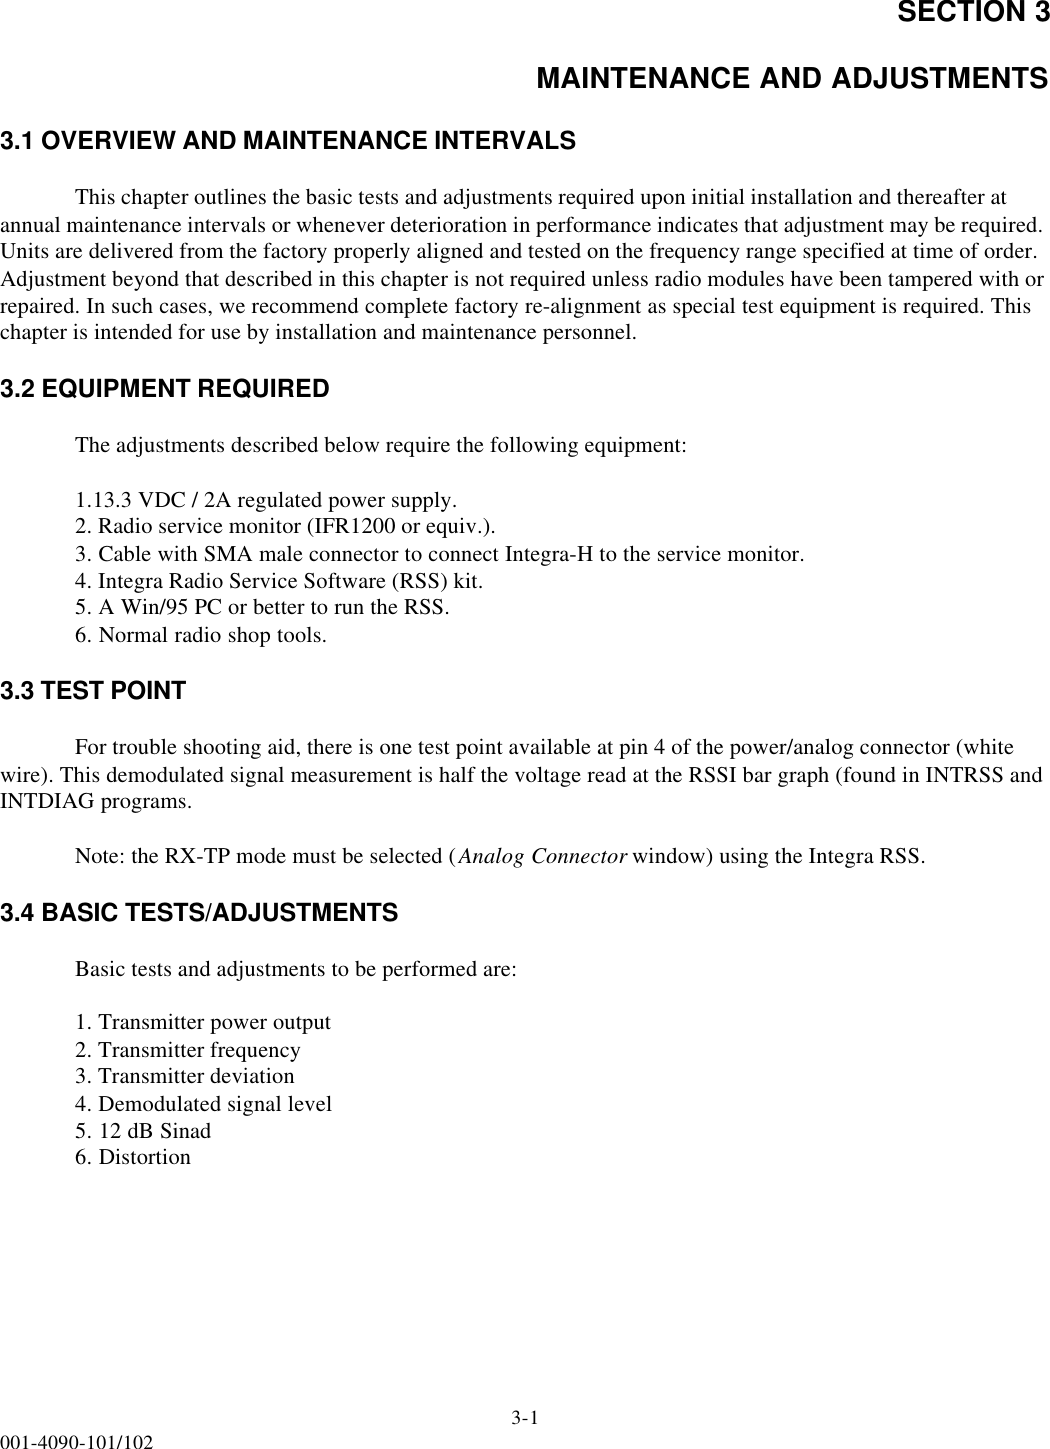 SECTION 33-1001-4090-101/102MAINTENANCE AND ADJUSTMENTS3.1 OVERVIEW AND MAINTENANCE INTERVALSThis chapter outlines the basic tests and adjustments required upon initial installation and thereafter at annual maintenance intervals or whenever deterioration in performance indicates that adjustment may be required. Units are delivered from the factory properly aligned and tested on the frequency range specified at time of order. Adjustment beyond that described in this chapter is not required unless radio modules have been tampered with or repaired. In such cases, we recommend complete factory re-alignment as special test equipment is required. This chapter is intended for use by installation and maintenance personnel.3.2 EQUIPMENT REQUIREDThe adjustments described below require the following equipment:1.13.3 VDC / 2A regulated power supply.2. Radio service monitor (IFR1200 or equiv.).3. Cable with SMA male connector to connect Integra-H to the service monitor.4. Integra Radio Service Software (RSS) kit.5. A Win/95 PC or better to run the RSS.6. Normal radio shop tools.3.3 TEST POINTFor trouble shooting aid, there is one test point available at pin 4 of the power/analog connector (white wire). This demodulated signal measurement is half the voltage read at the RSSI bar graph (found in INTRSS and INTDIAG programs.Note: the RX-TP mode must be selected (Analog Connector window) using the Integra RSS.3.4 BASIC TESTS/ADJUSTMENTS Basic tests and adjustments to be performed are:1. Transmitter power output2. Transmitter frequency3. Transmitter deviation4. Demodulated signal level5. 12 dB Sinad6. Distortion